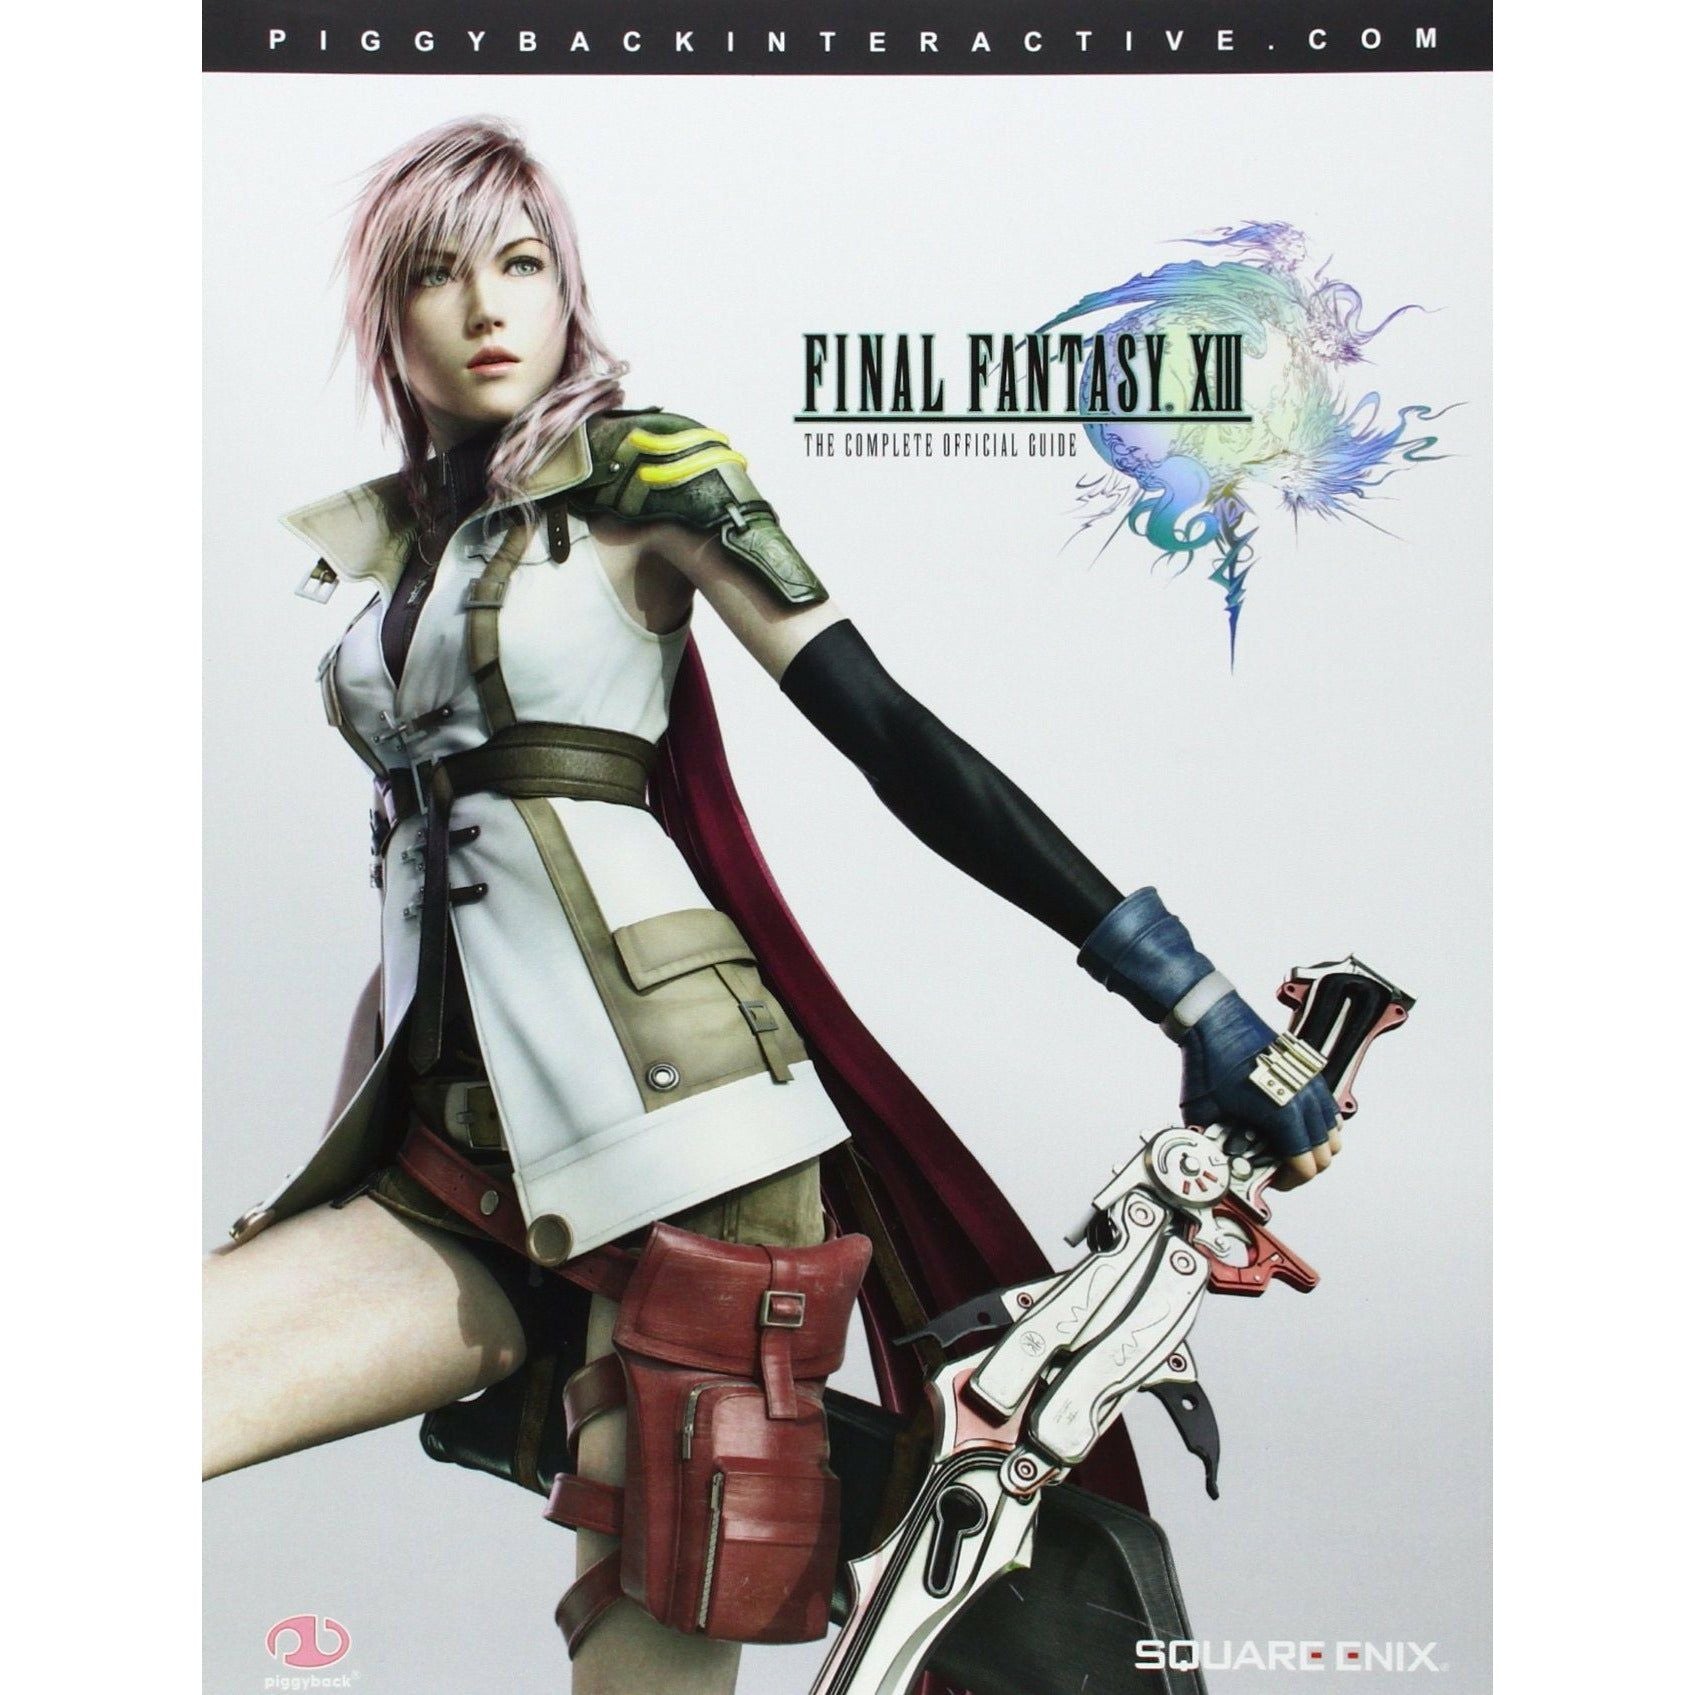 STRAT - Final Fantasy XIII The Complete Official Guide - Piggyback